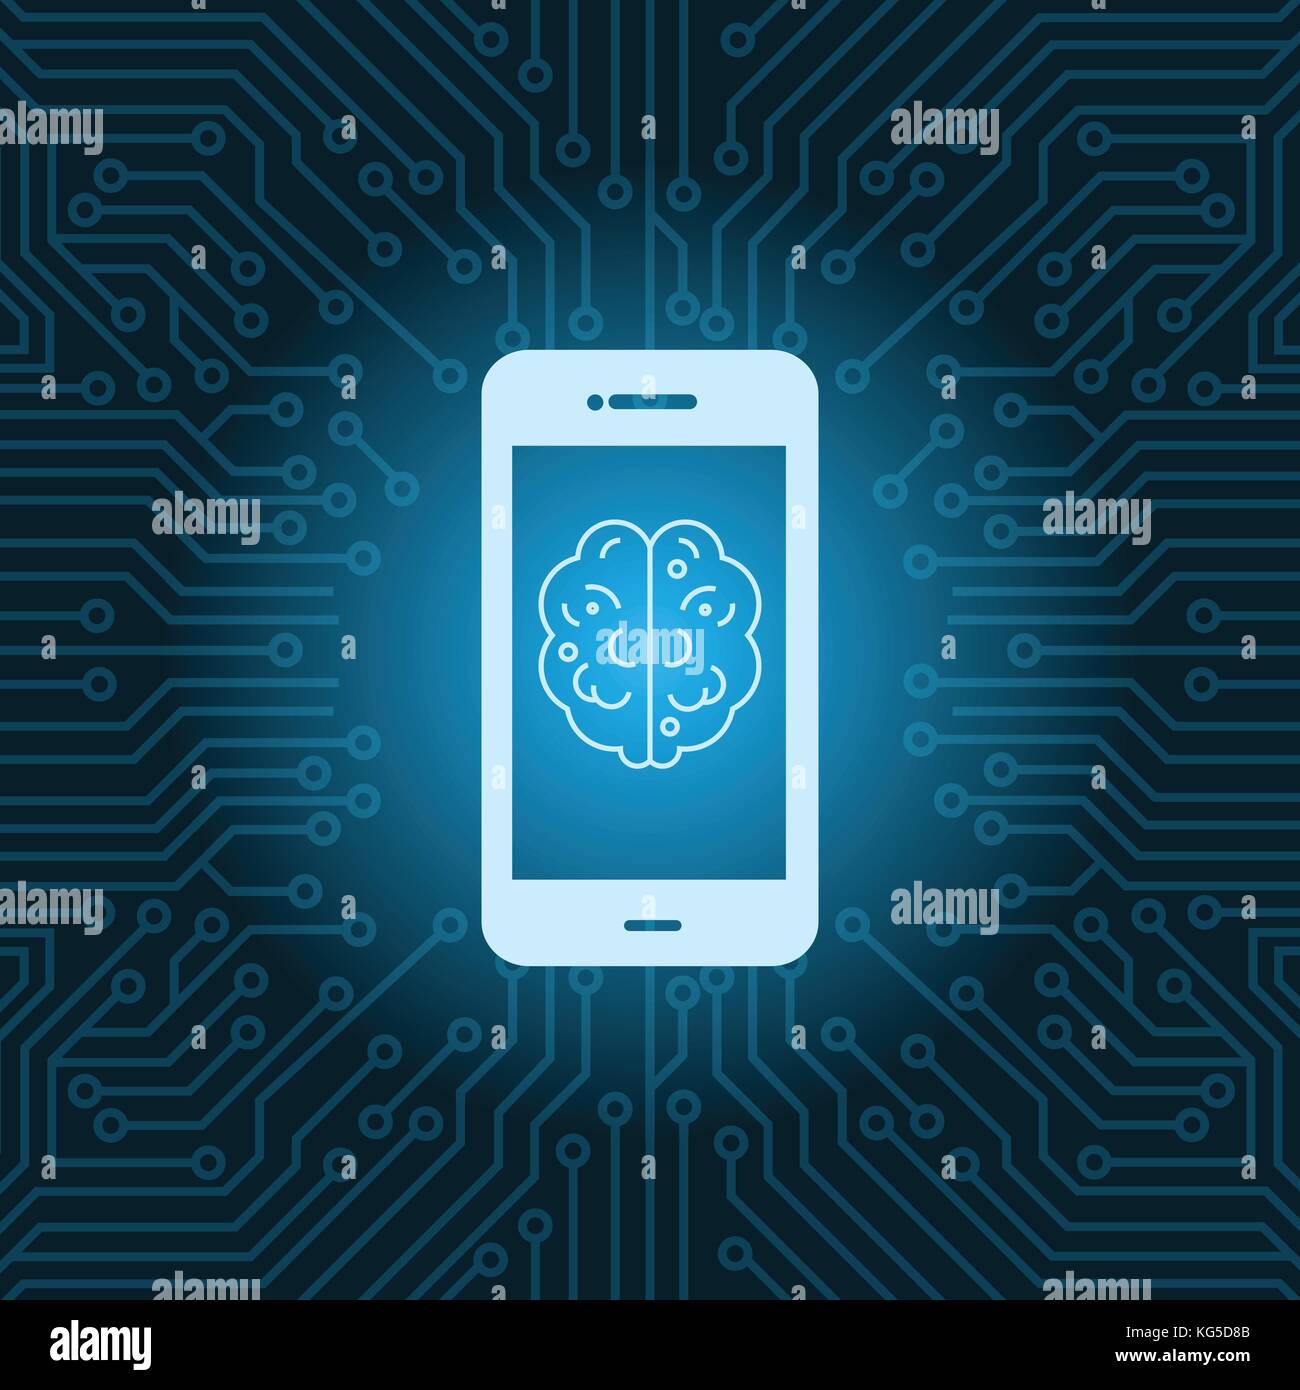 Smart Phone With Brain Image Icon Over Blue Circuit Motherboard Background Stock Vector